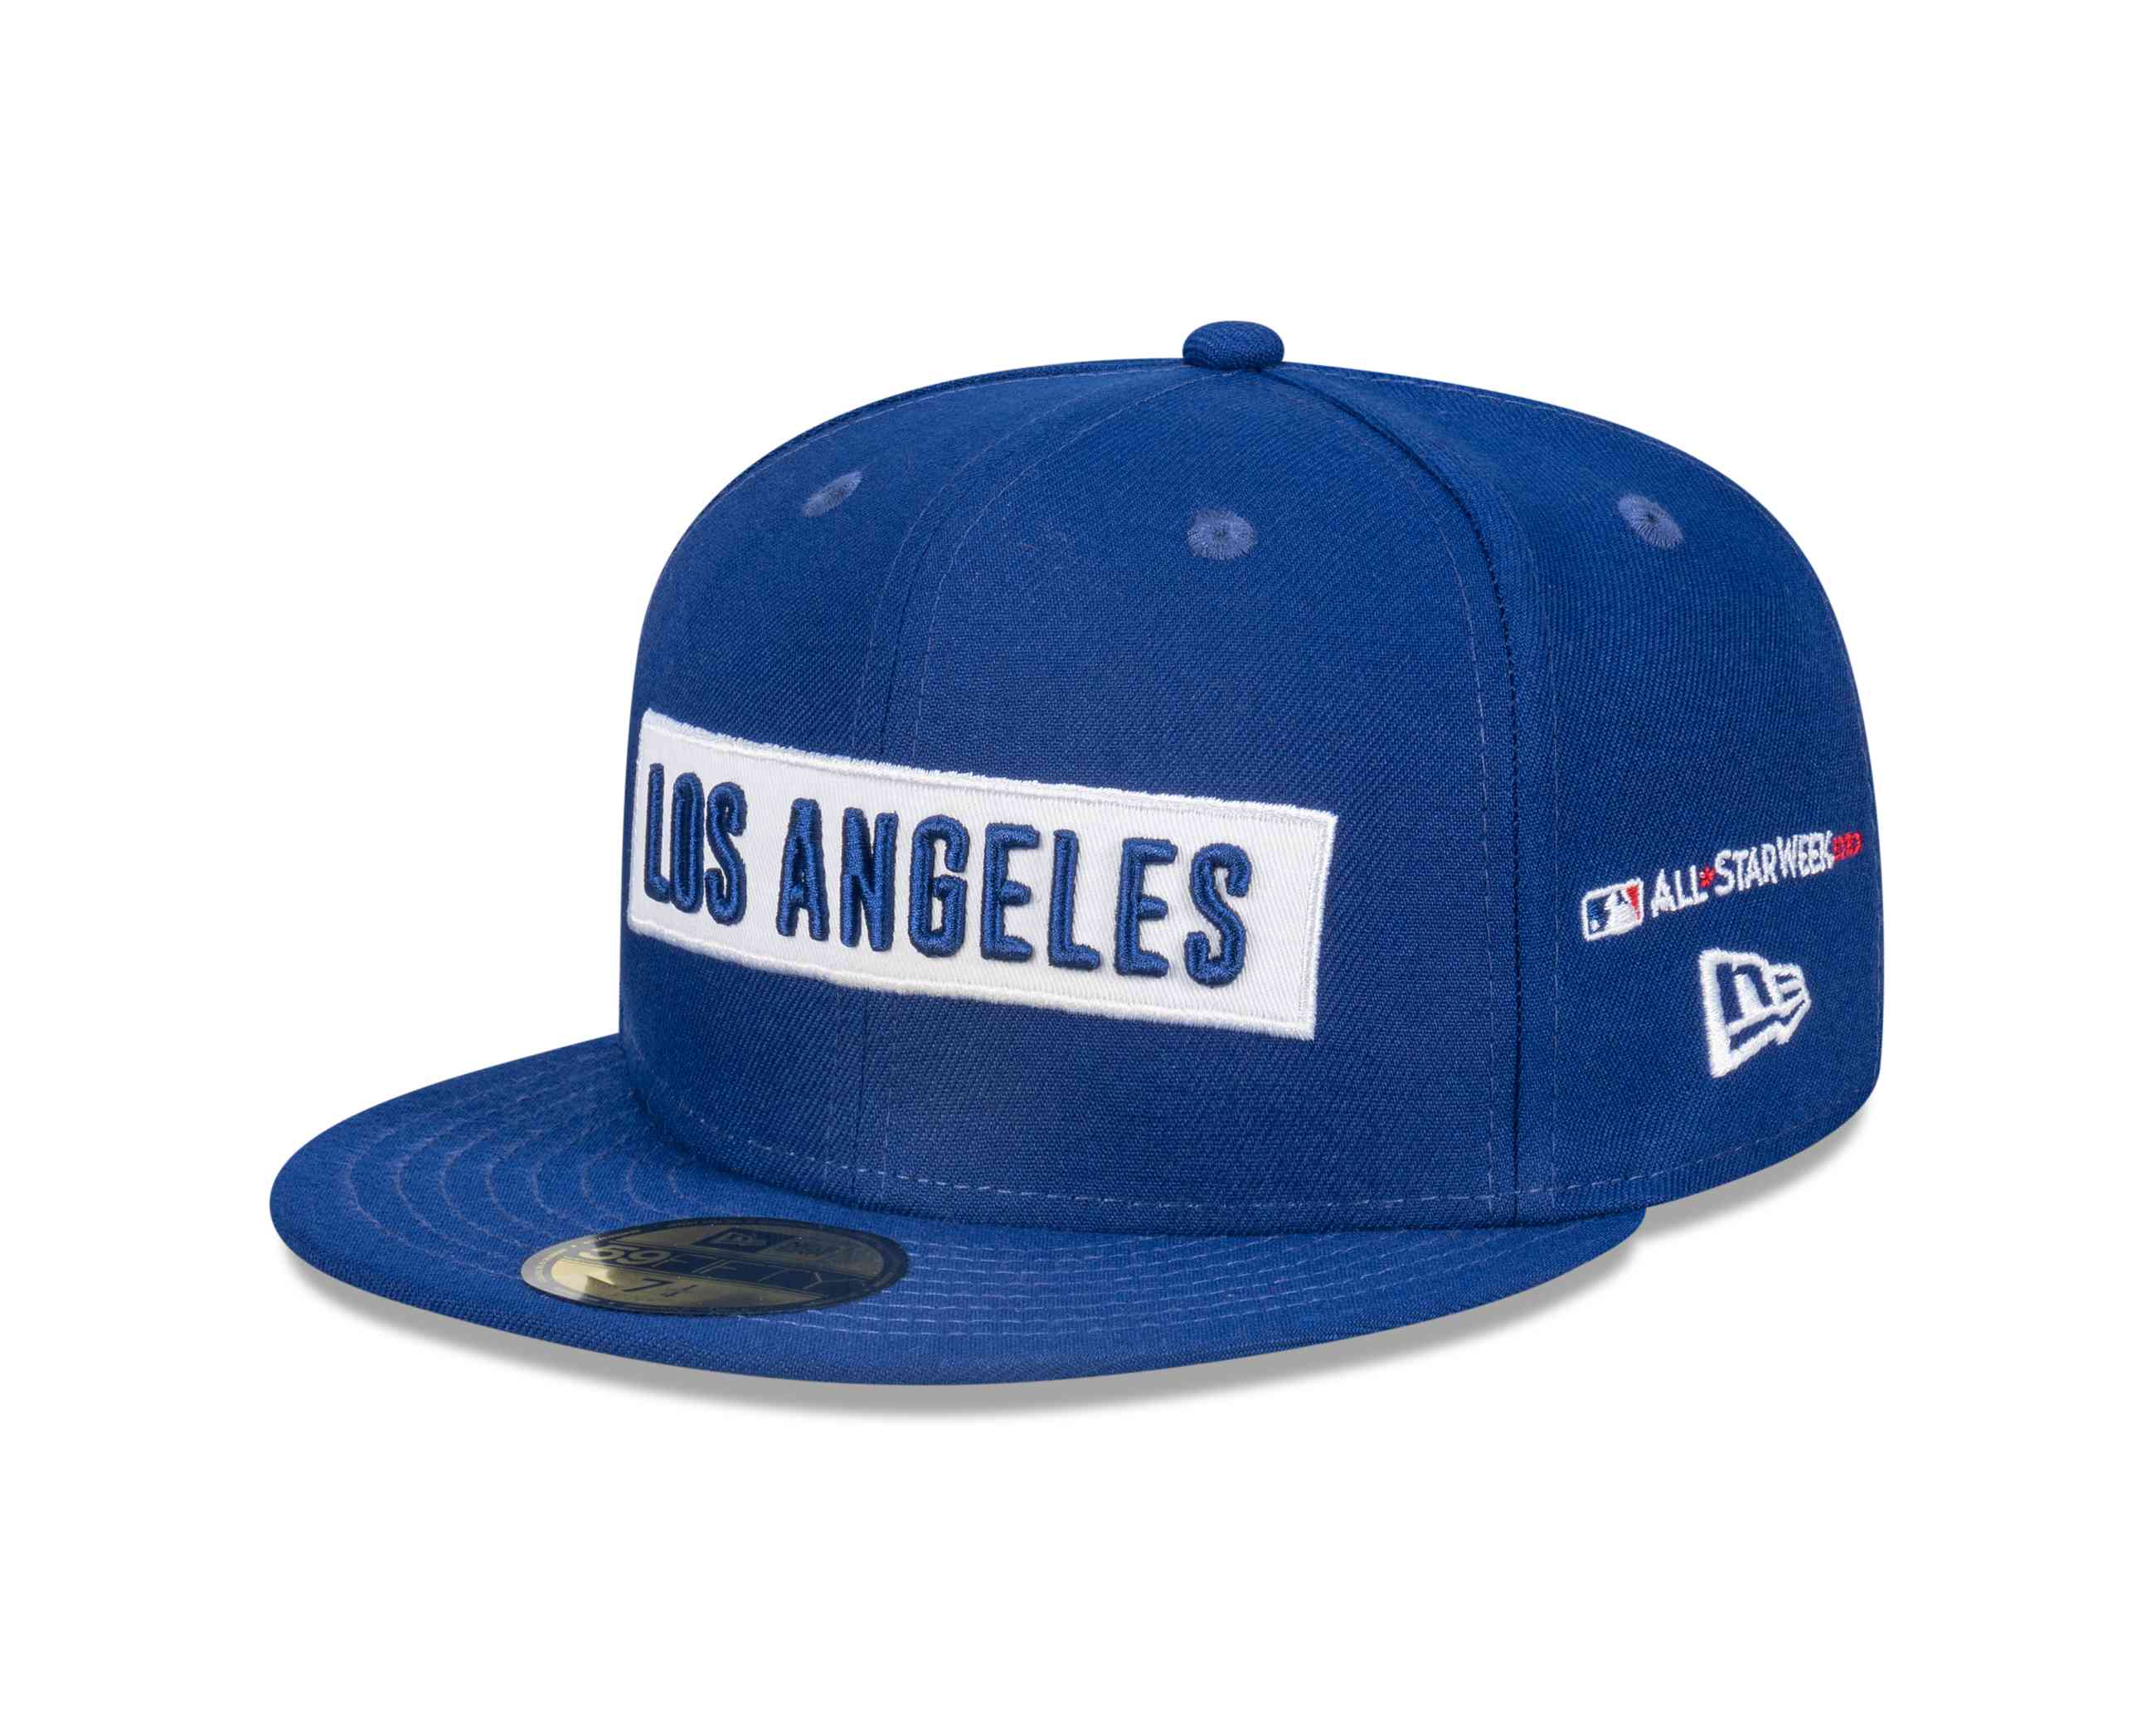 New Era - MLB Los Angeles Dodgers All Star Game Multi 59Fifty Fitted Cap